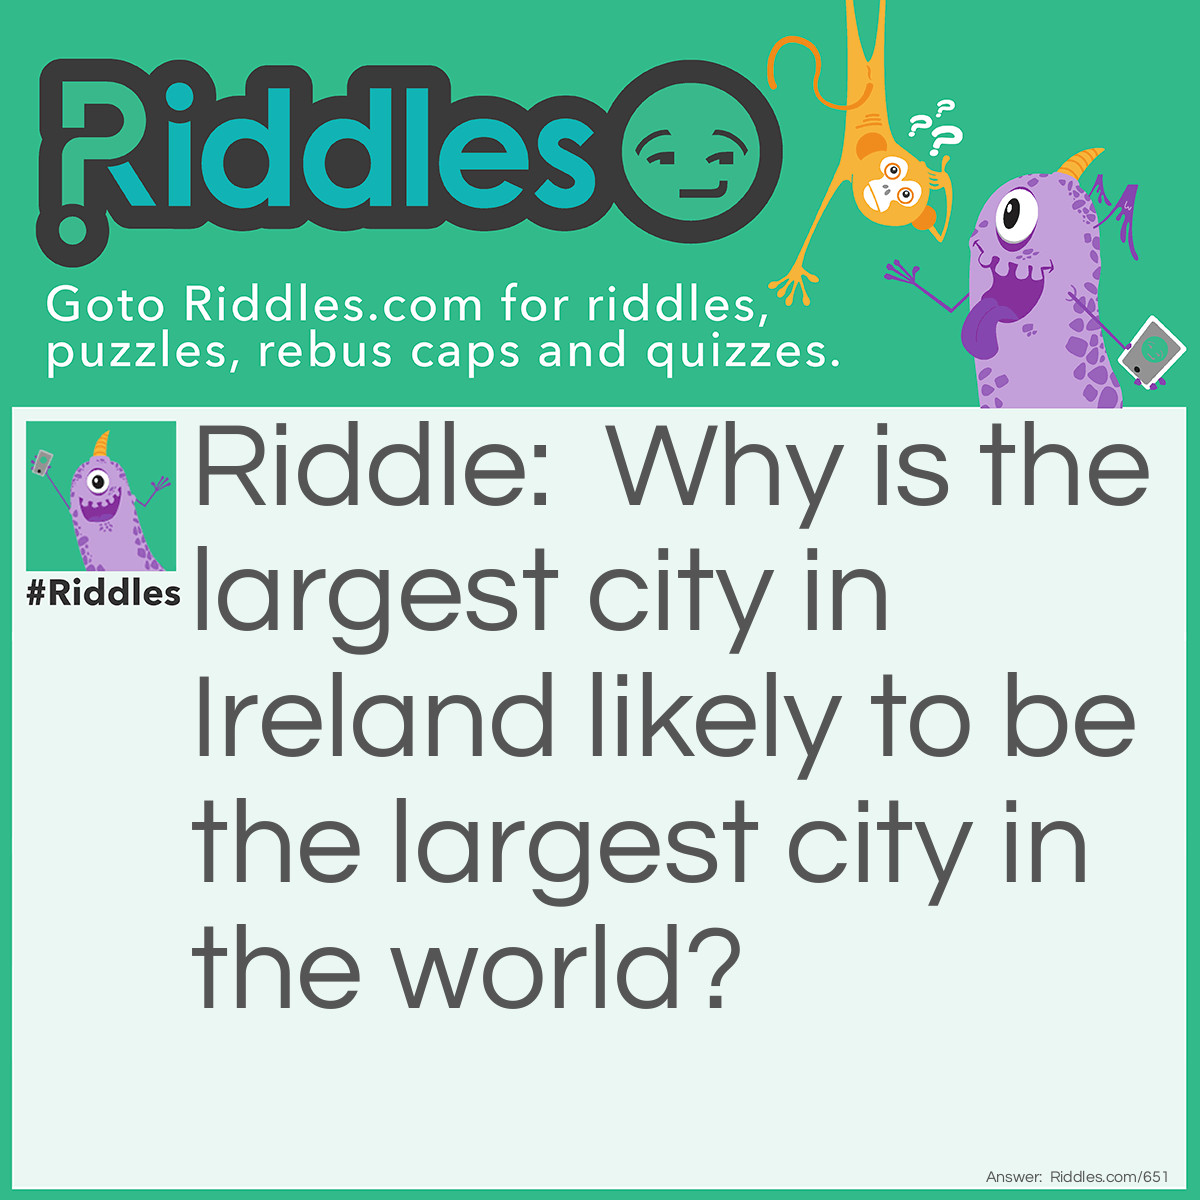 Riddle: Why is the largest city in Ireland likely to be the largest city in the world? Answer: Dublin, because it is every year doubling.